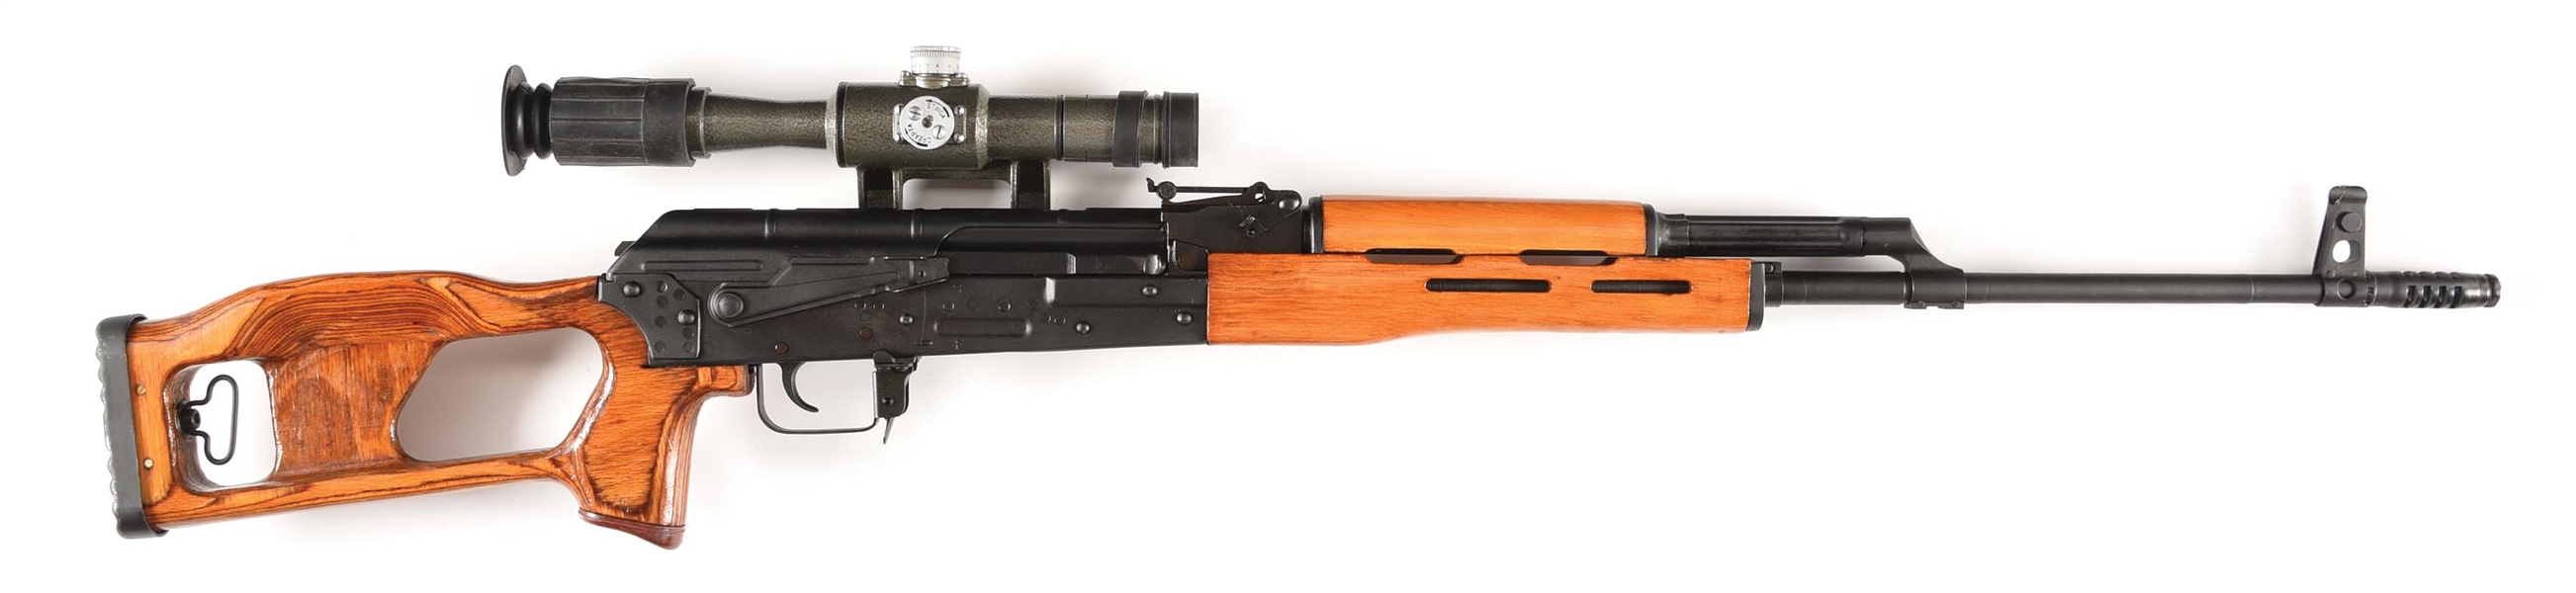 (M) ROMANIAN MODEL PSL SNIPER SEMI-AUTOMATIC RIFLE WITH LPS SCOPE.